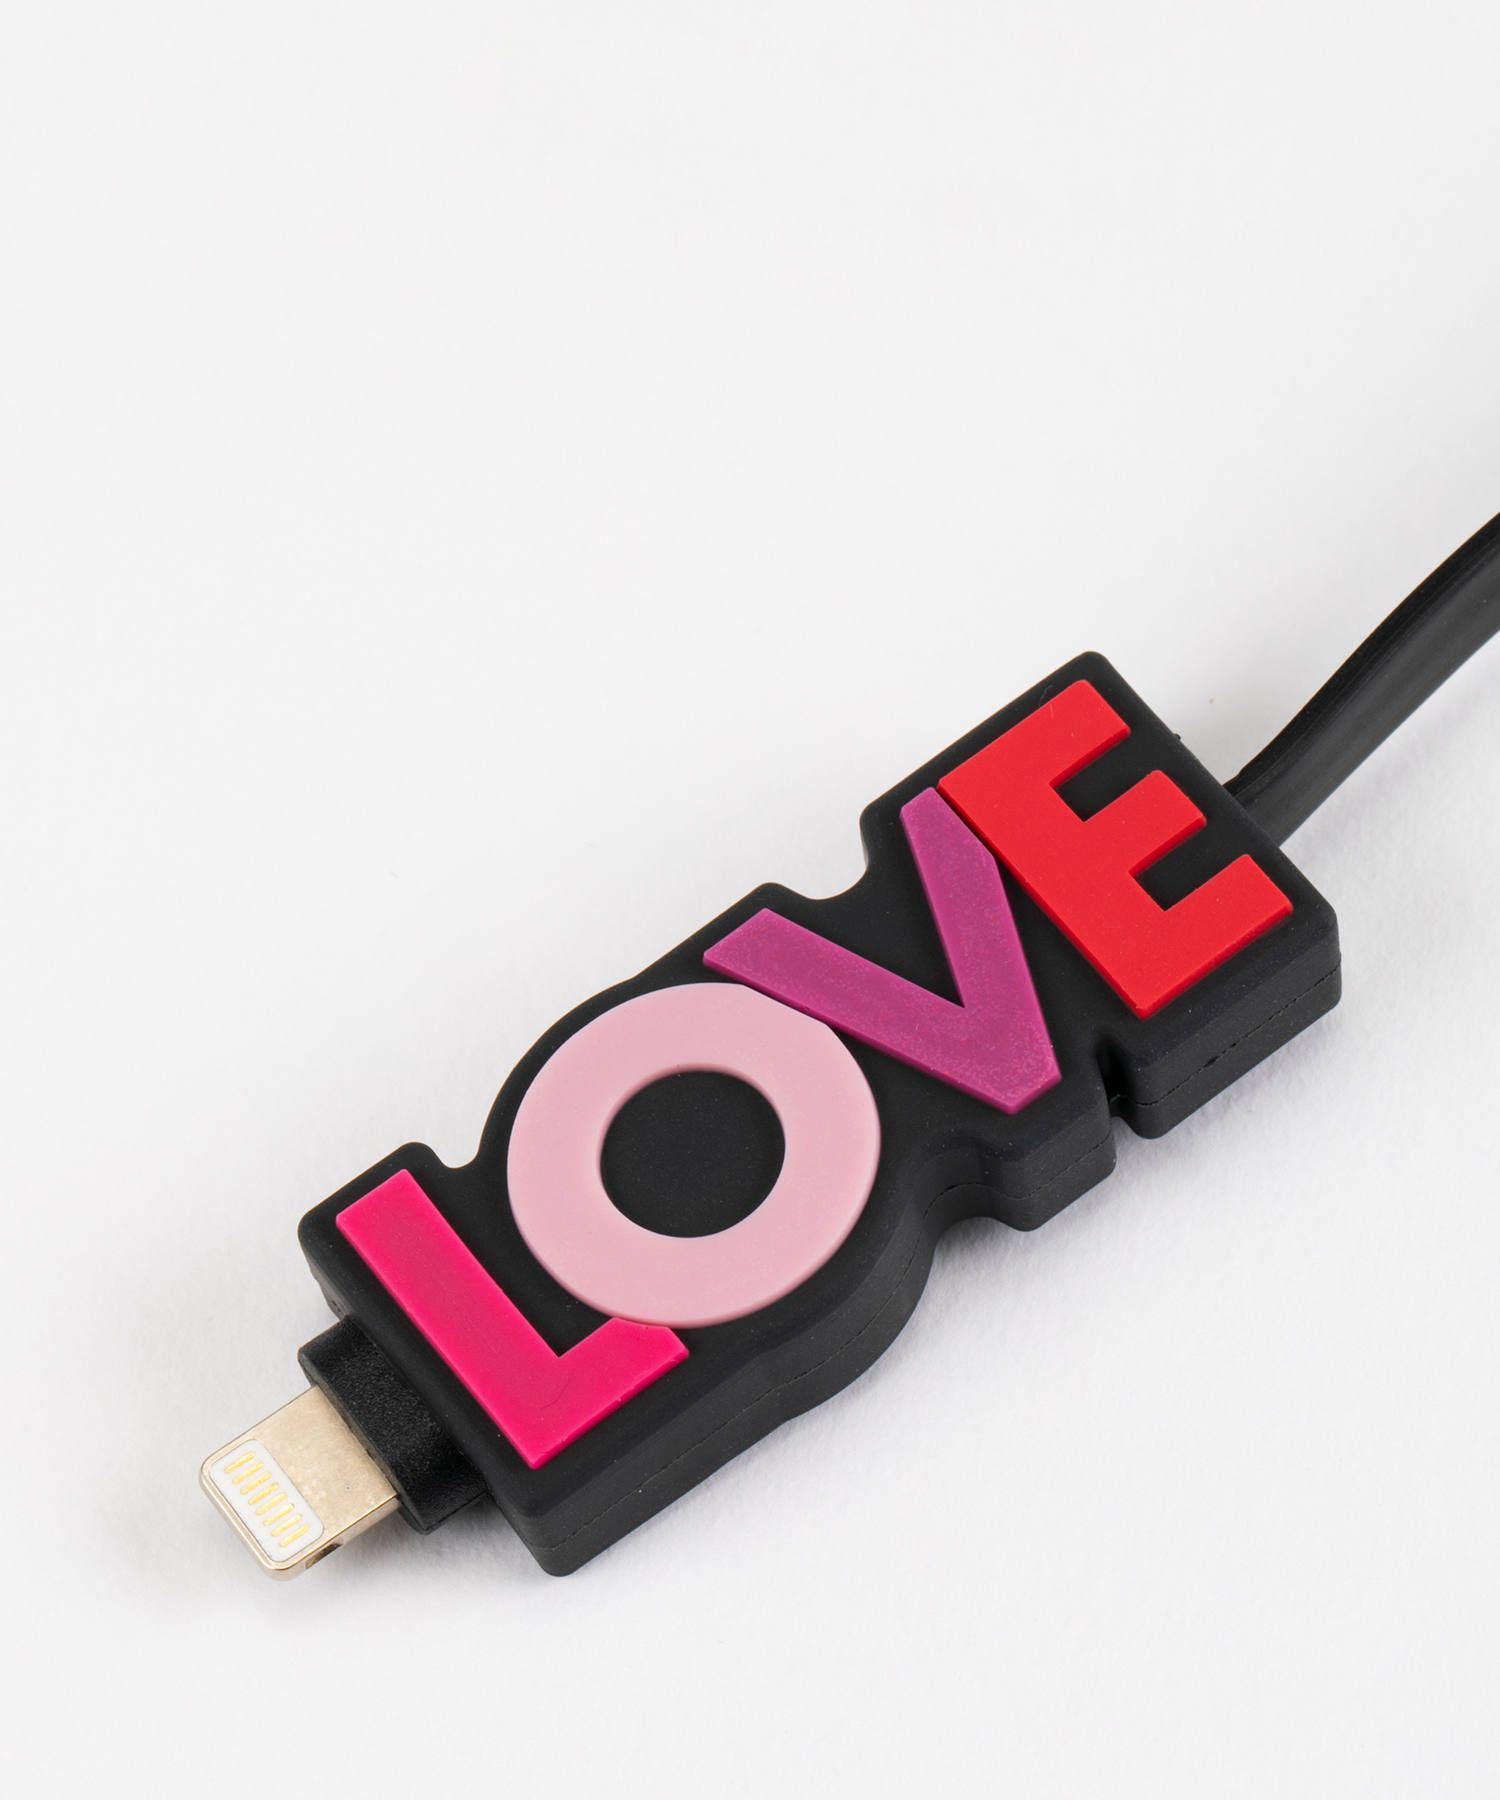 IPHORIA - Charging Cable extra long for Apple iPhone - Love Rose 